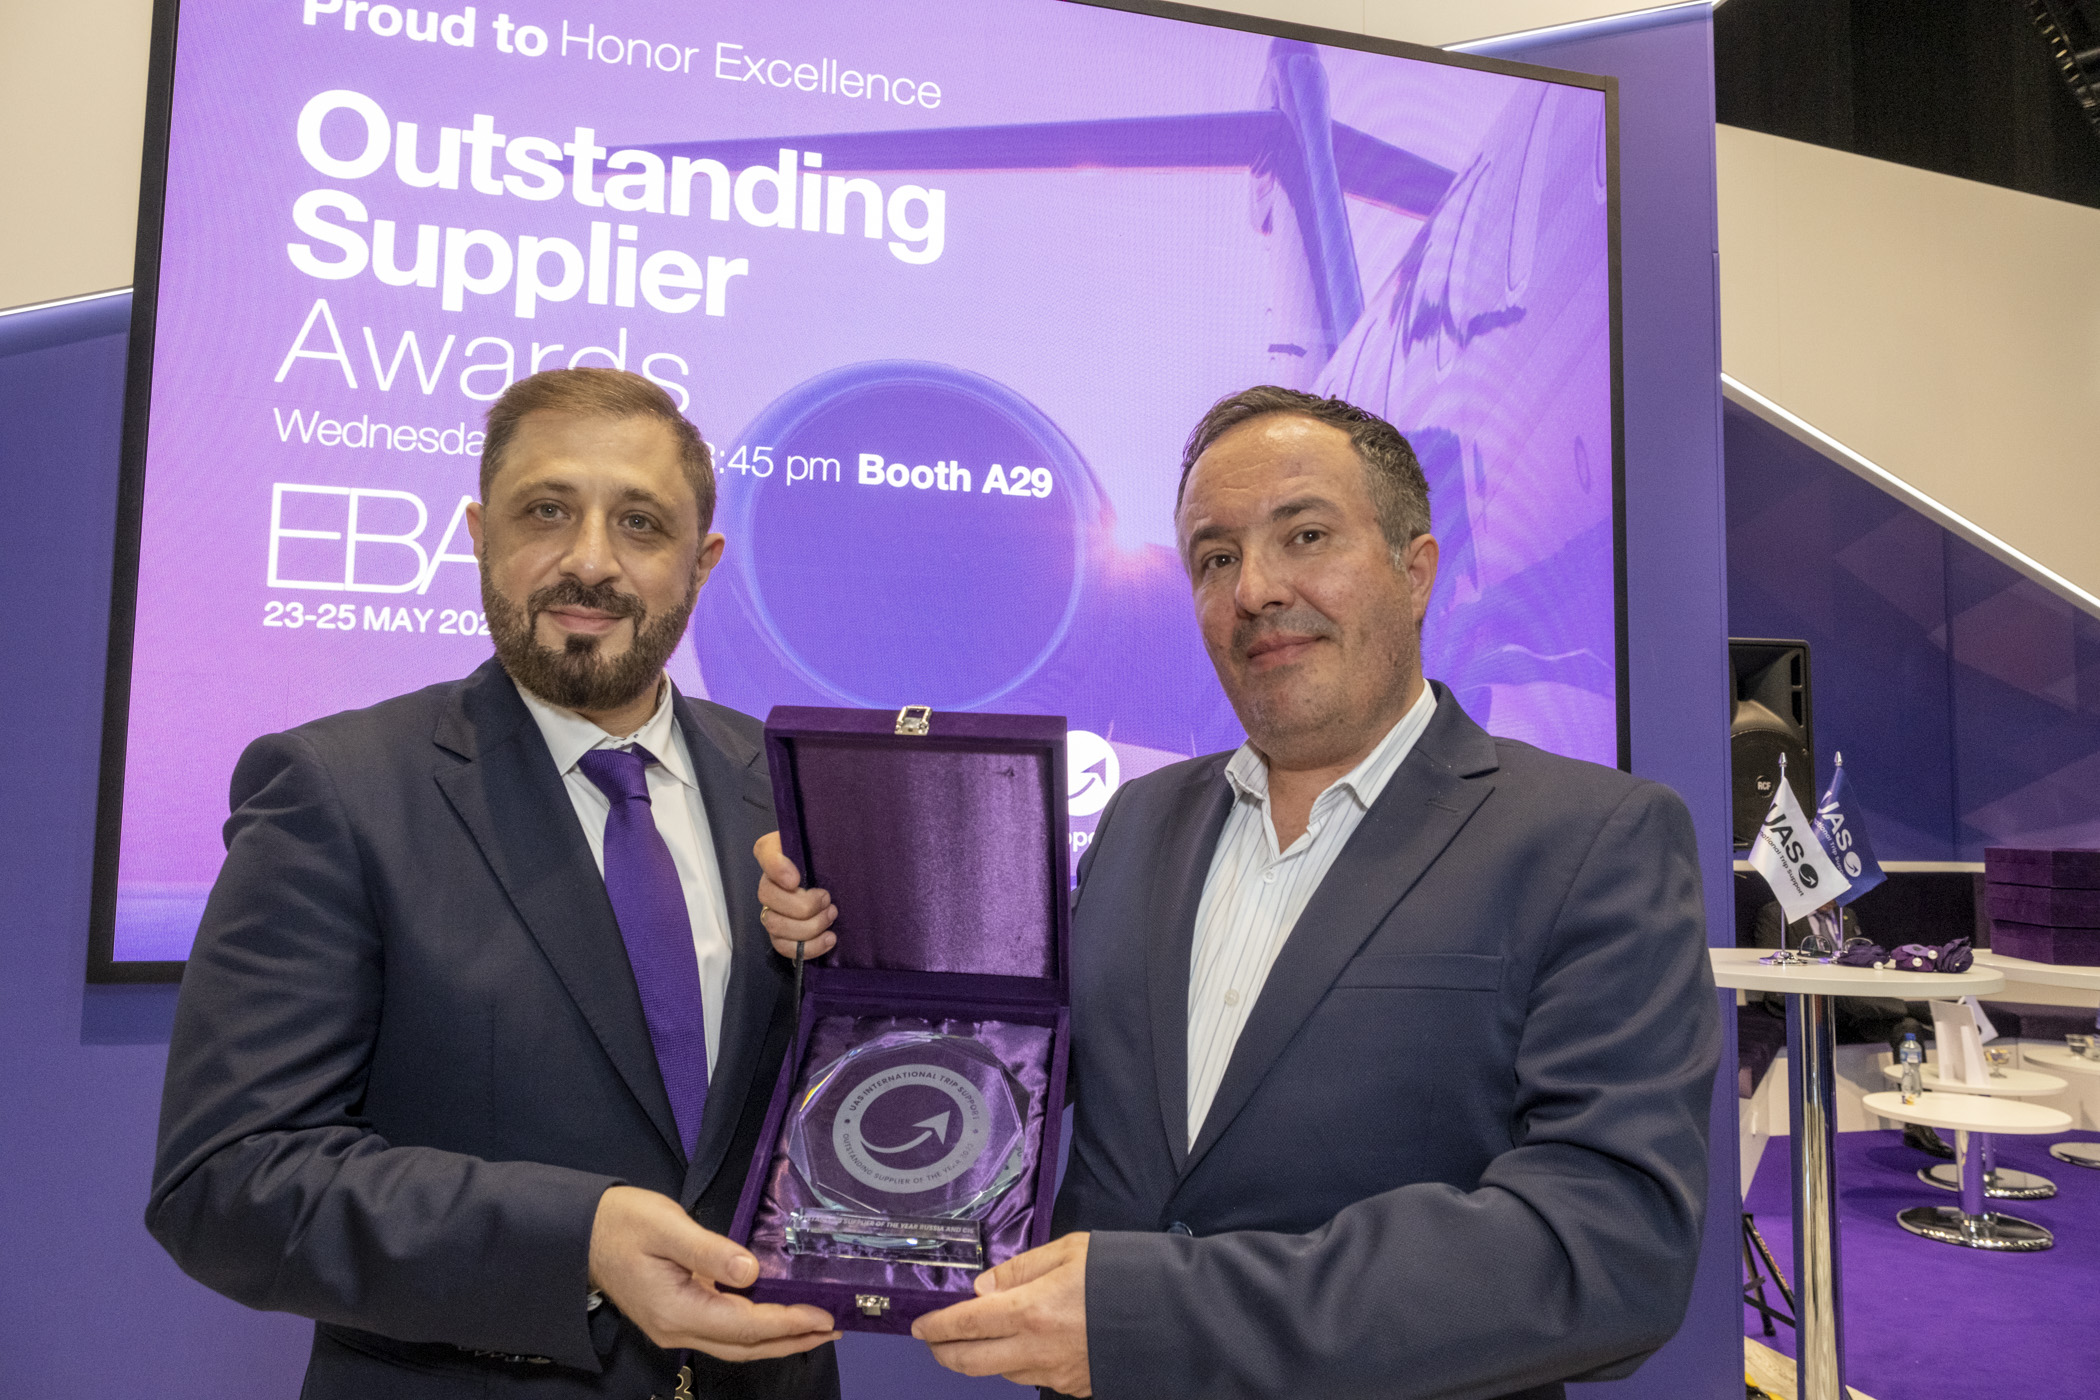 “ASG Business Aviation” has been awarded as “Outstanding Supplier of the Year CIS”